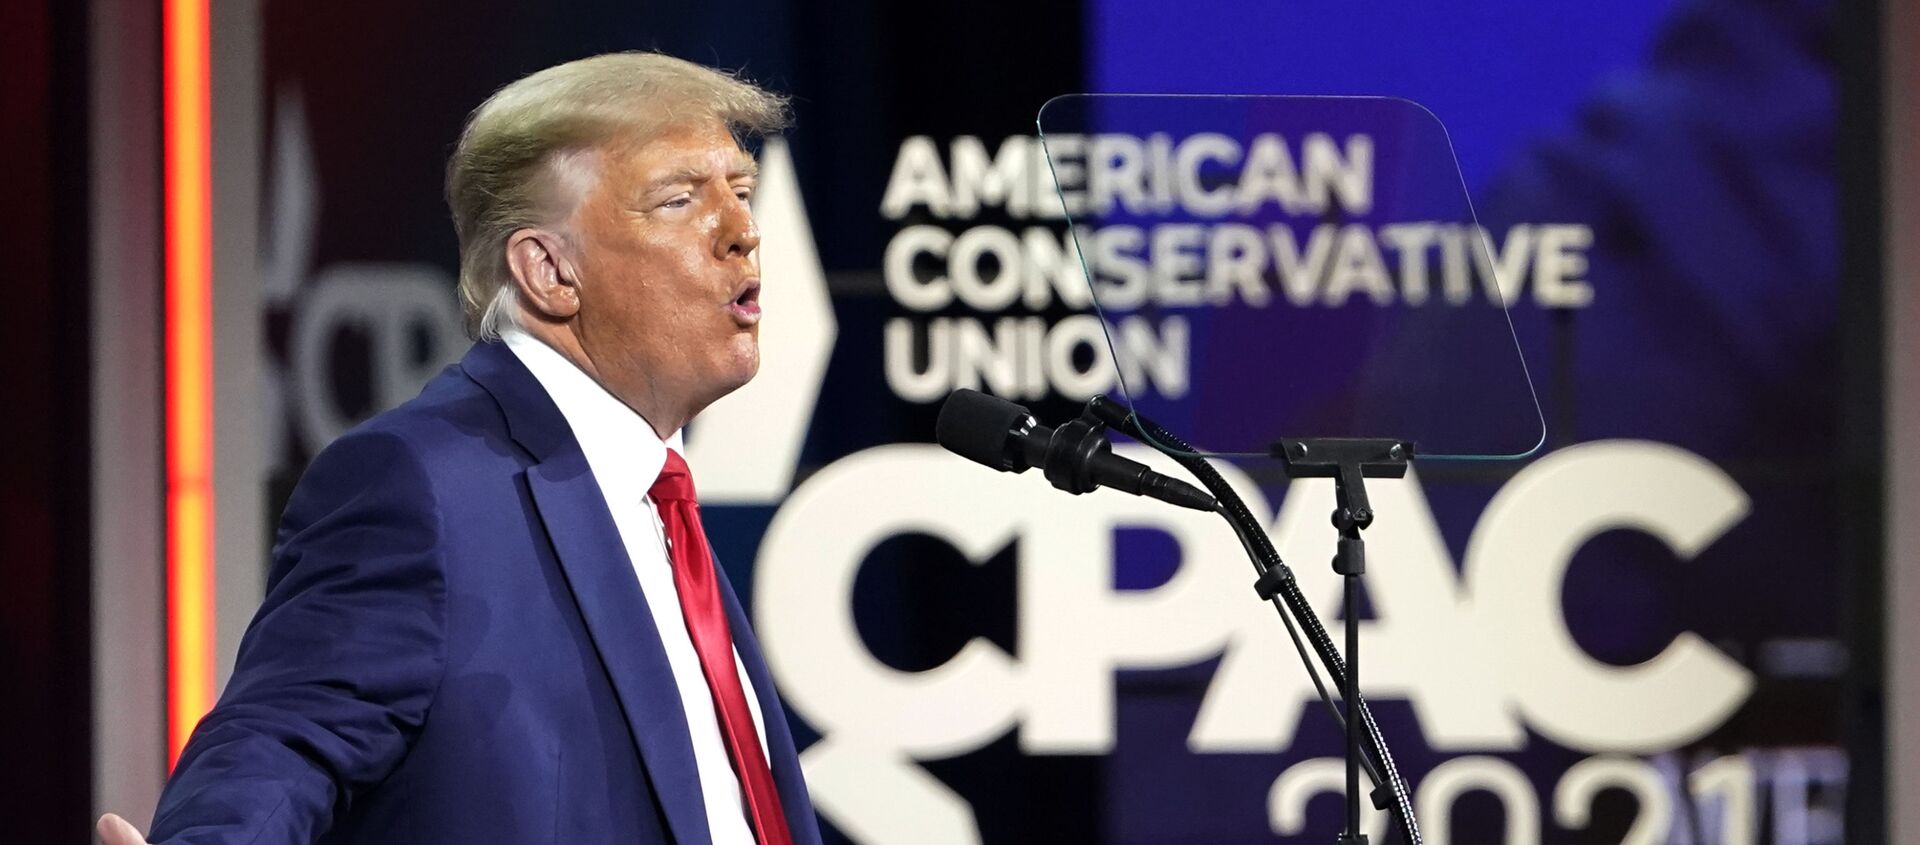 Former President Donald Trump speaks at the Conservative Political Action Conference (CPAC), Sunday, Feb. 28, 2021, in Orlando, Fla. - Sputnik International, 1920, 02.03.2021